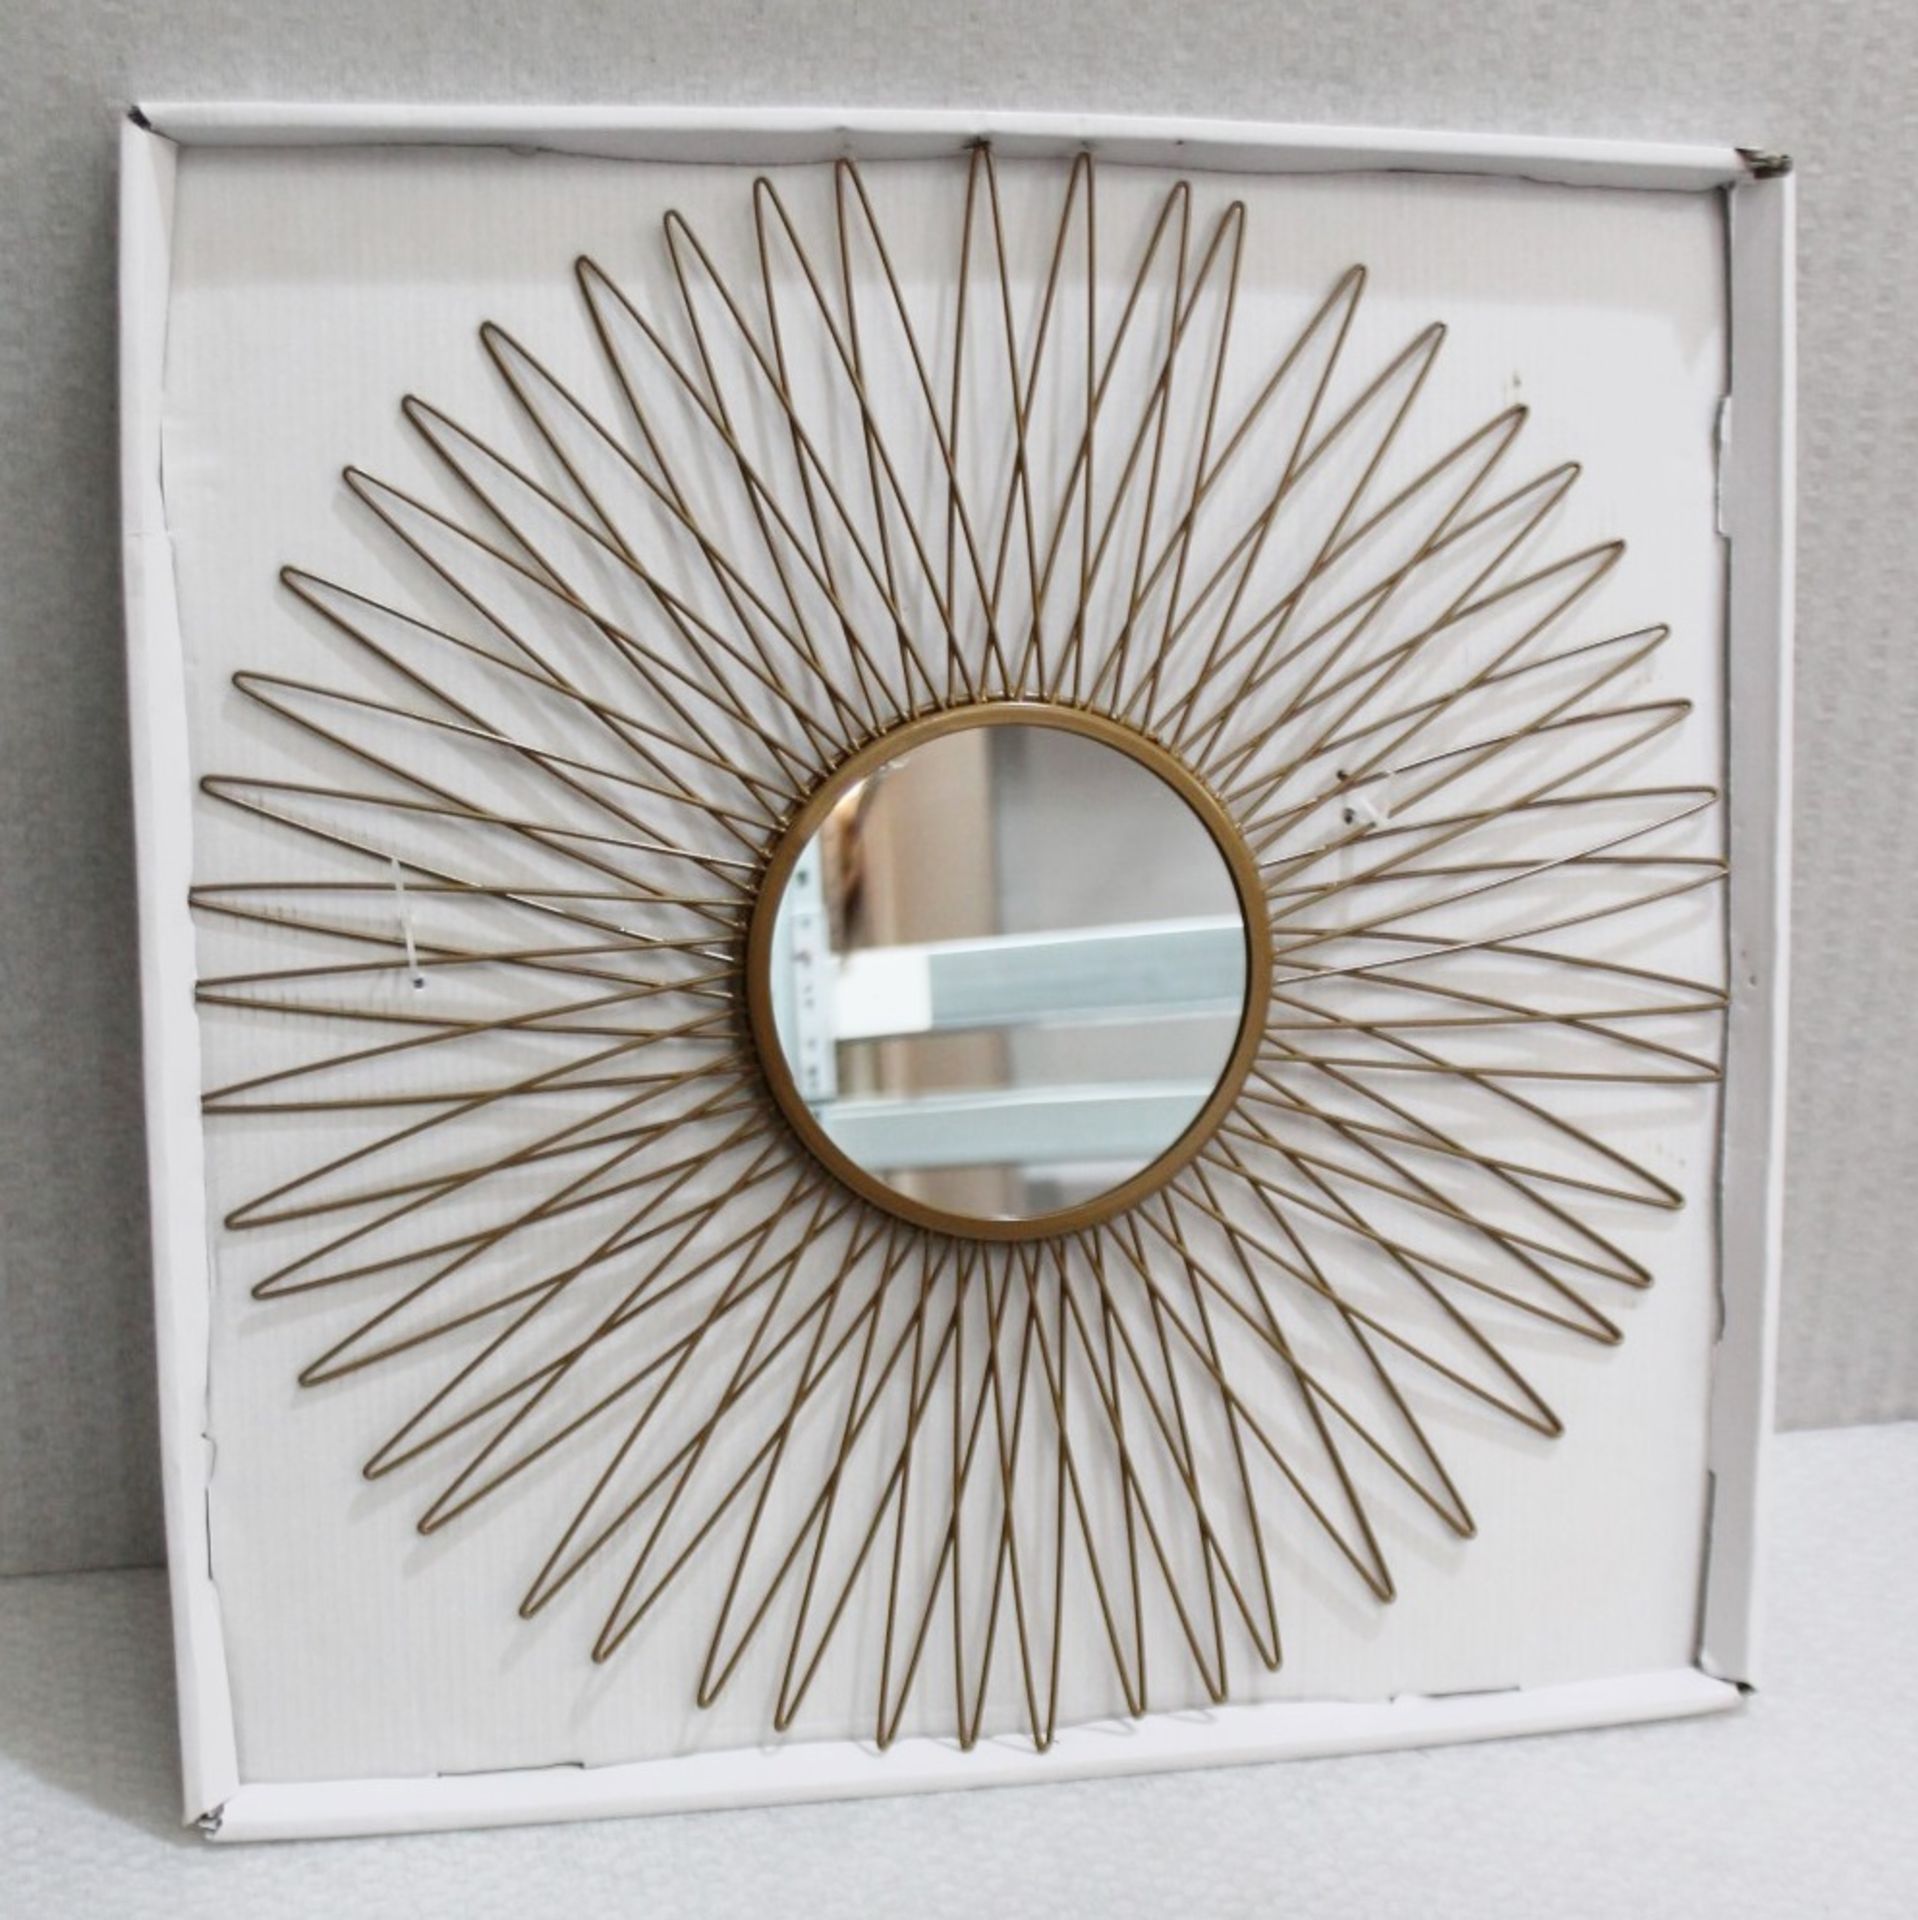 1 x DARTHOME Large Glass Wall Mirror With A Geometric Design - Dimensions: 50 x 50cm - Unused